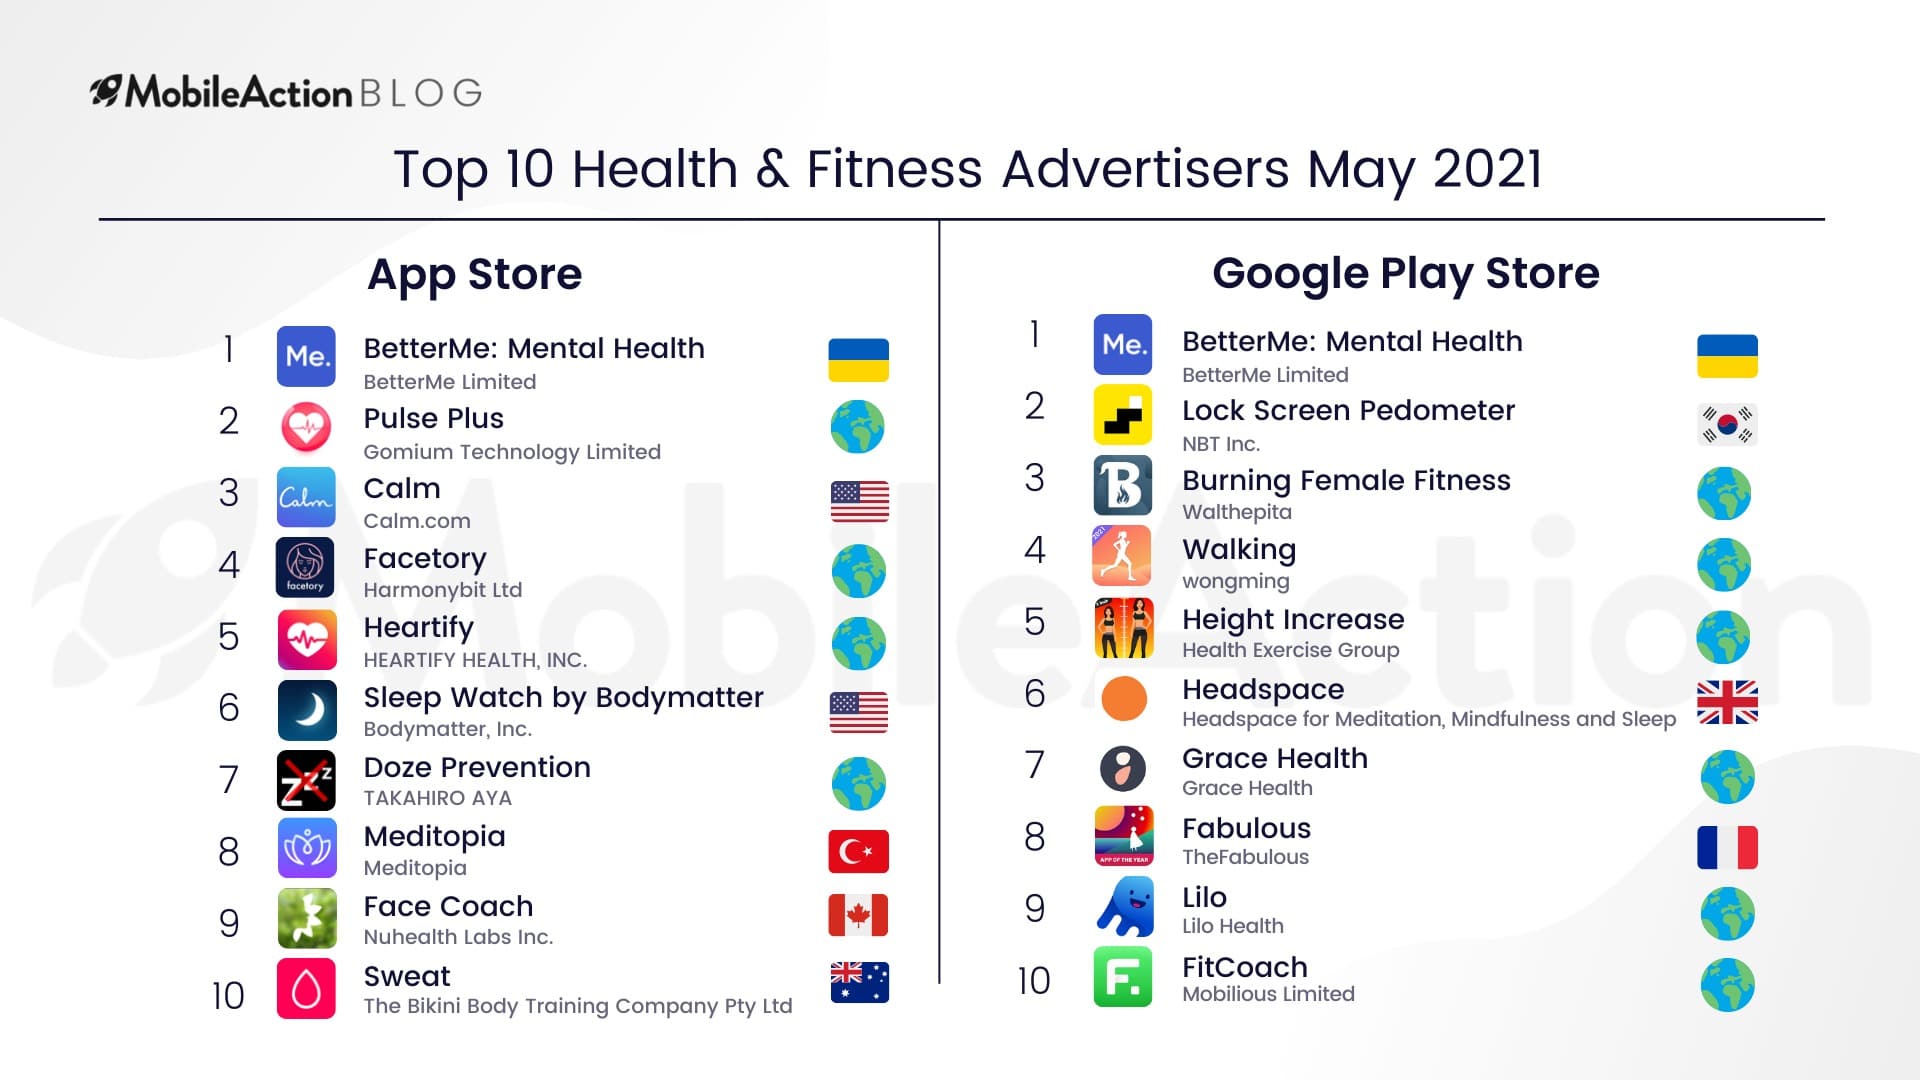 Health and Fitness Apps Top Advertisers for May 2021